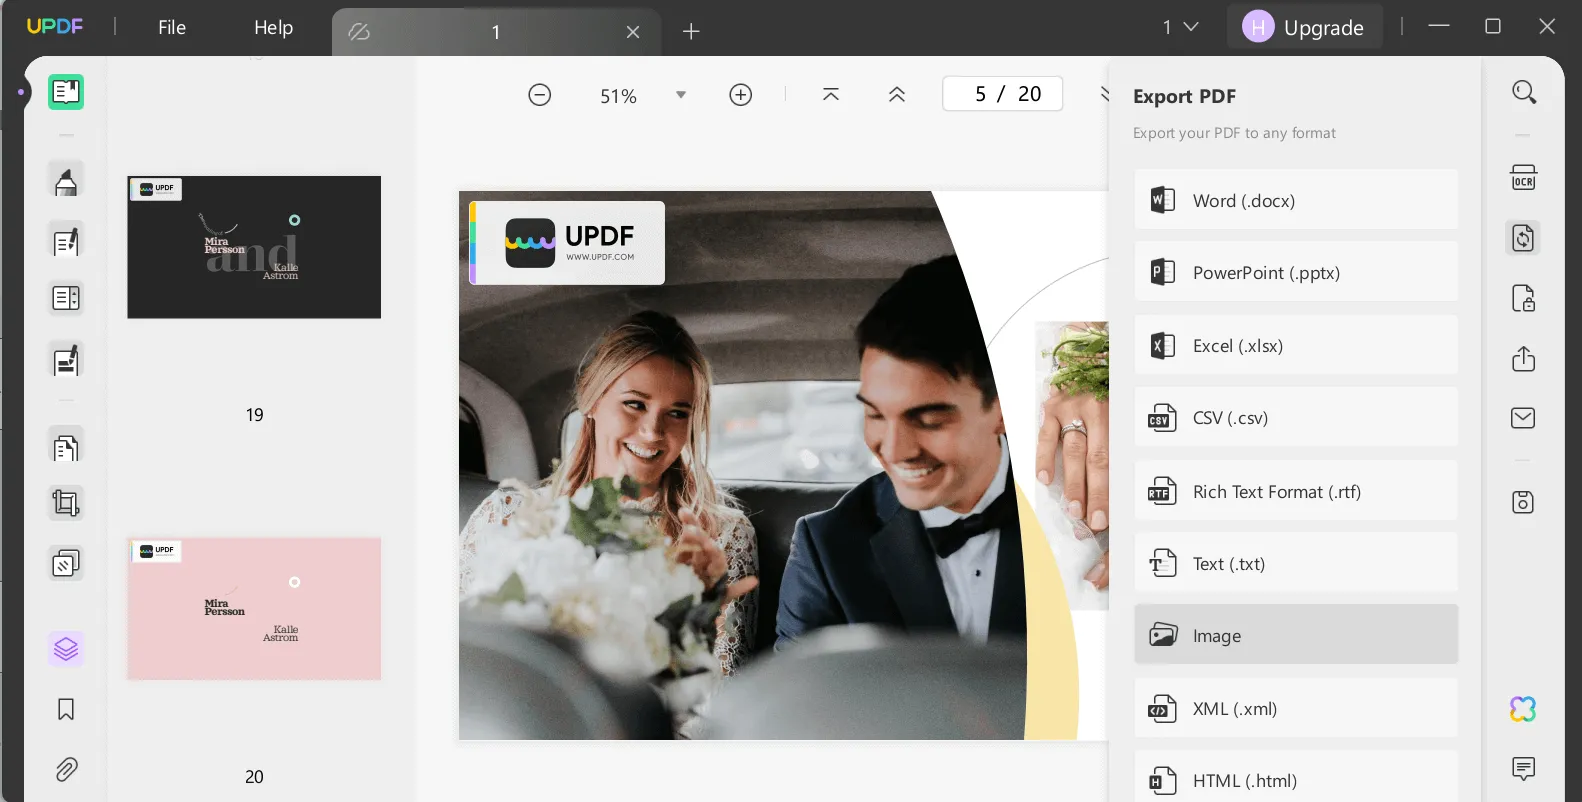 Convert PPT to images with UPDF